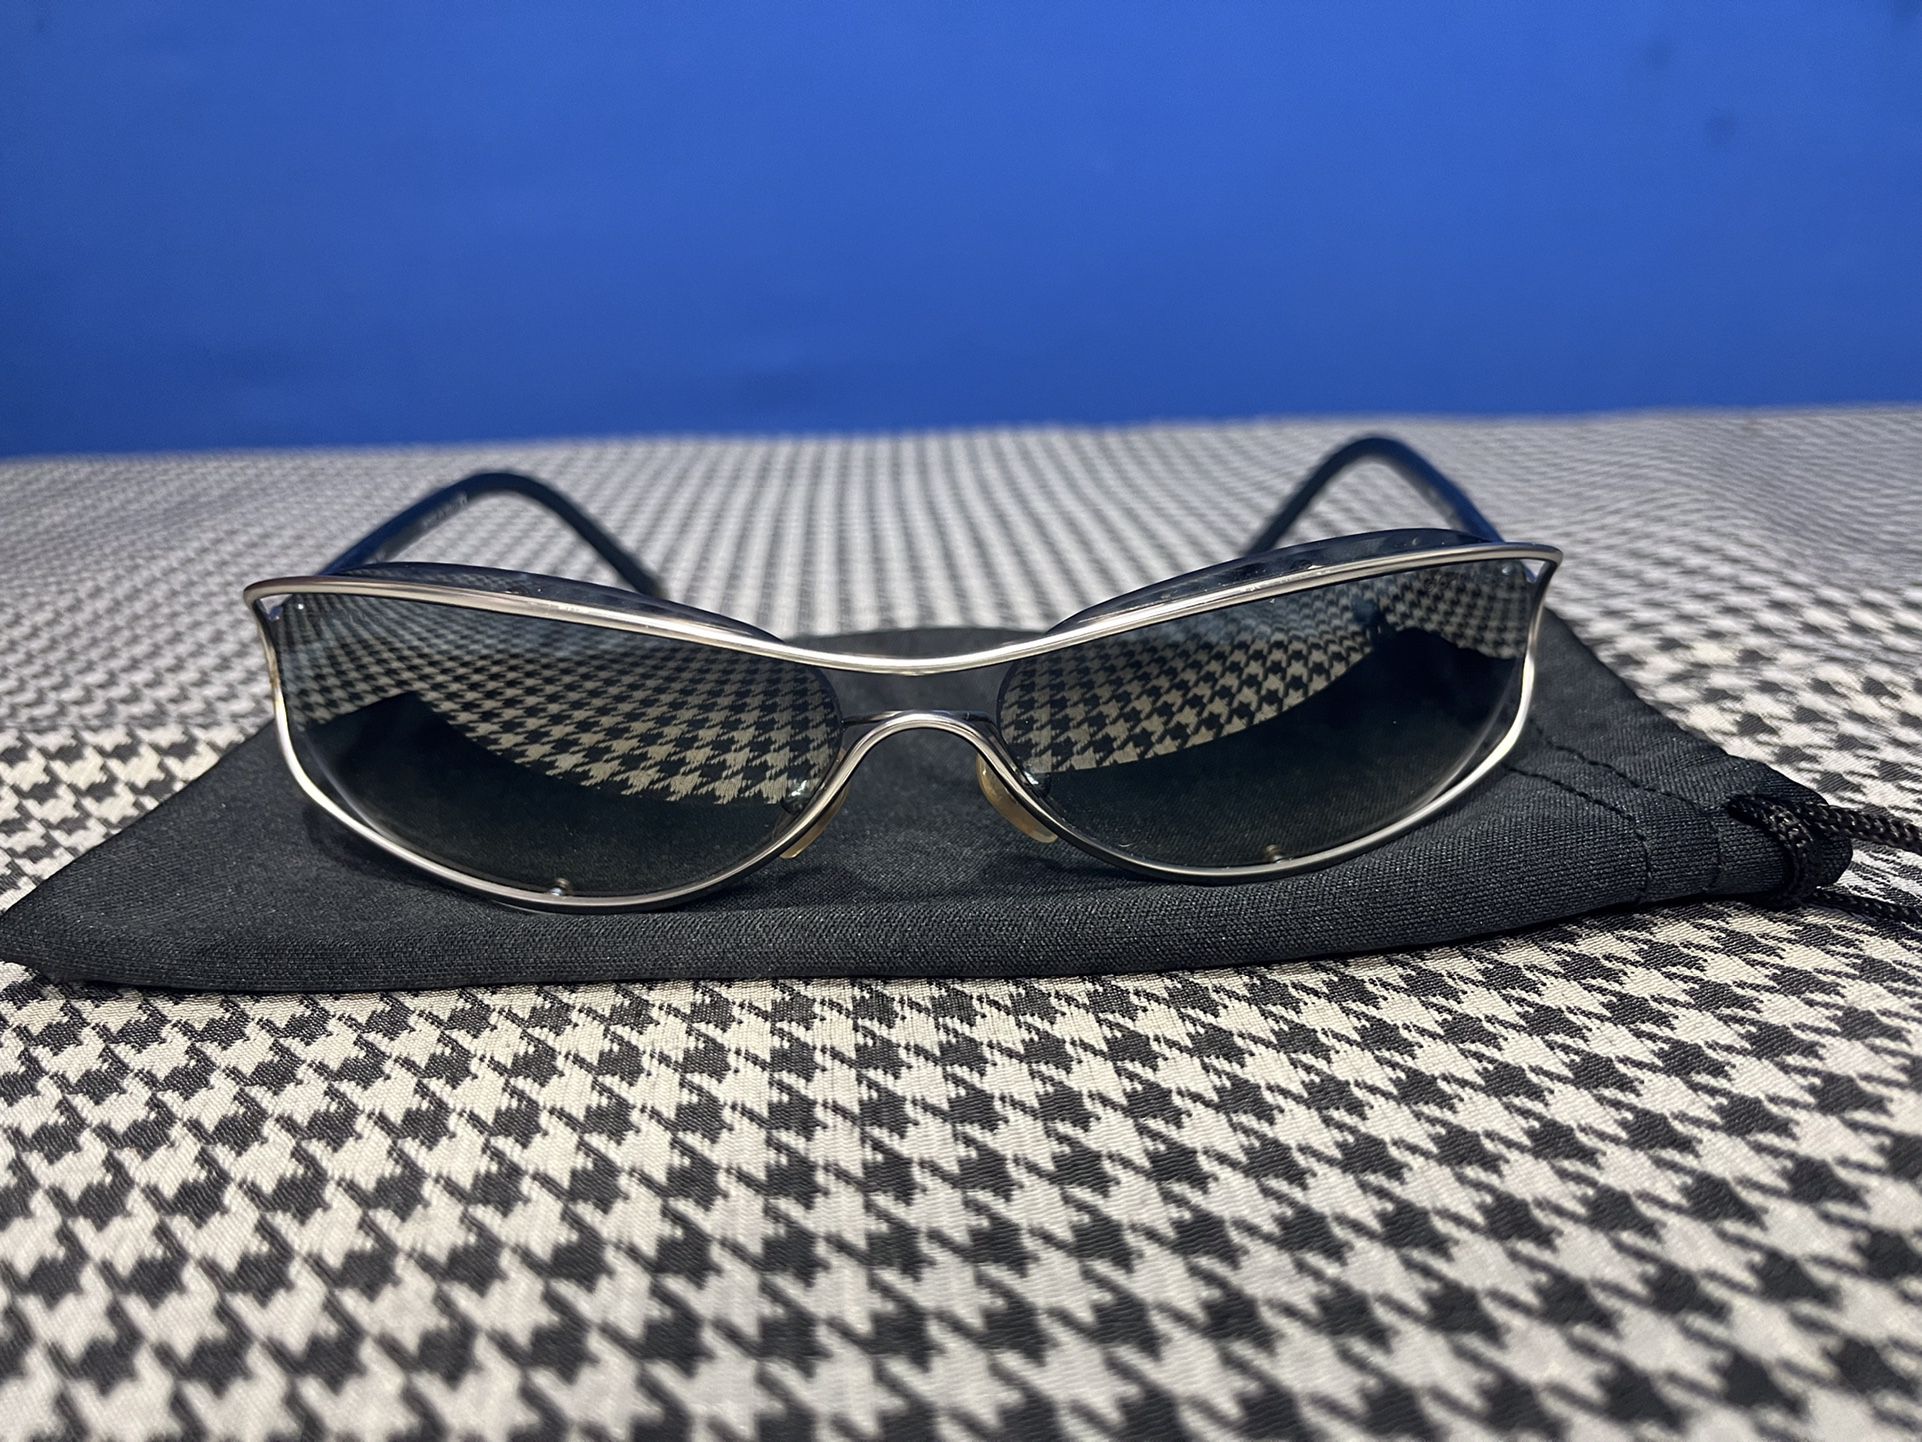 CHANEL Glasses - Light Blue Tint Lenses for Sale in Brooklyn, NY - OfferUp